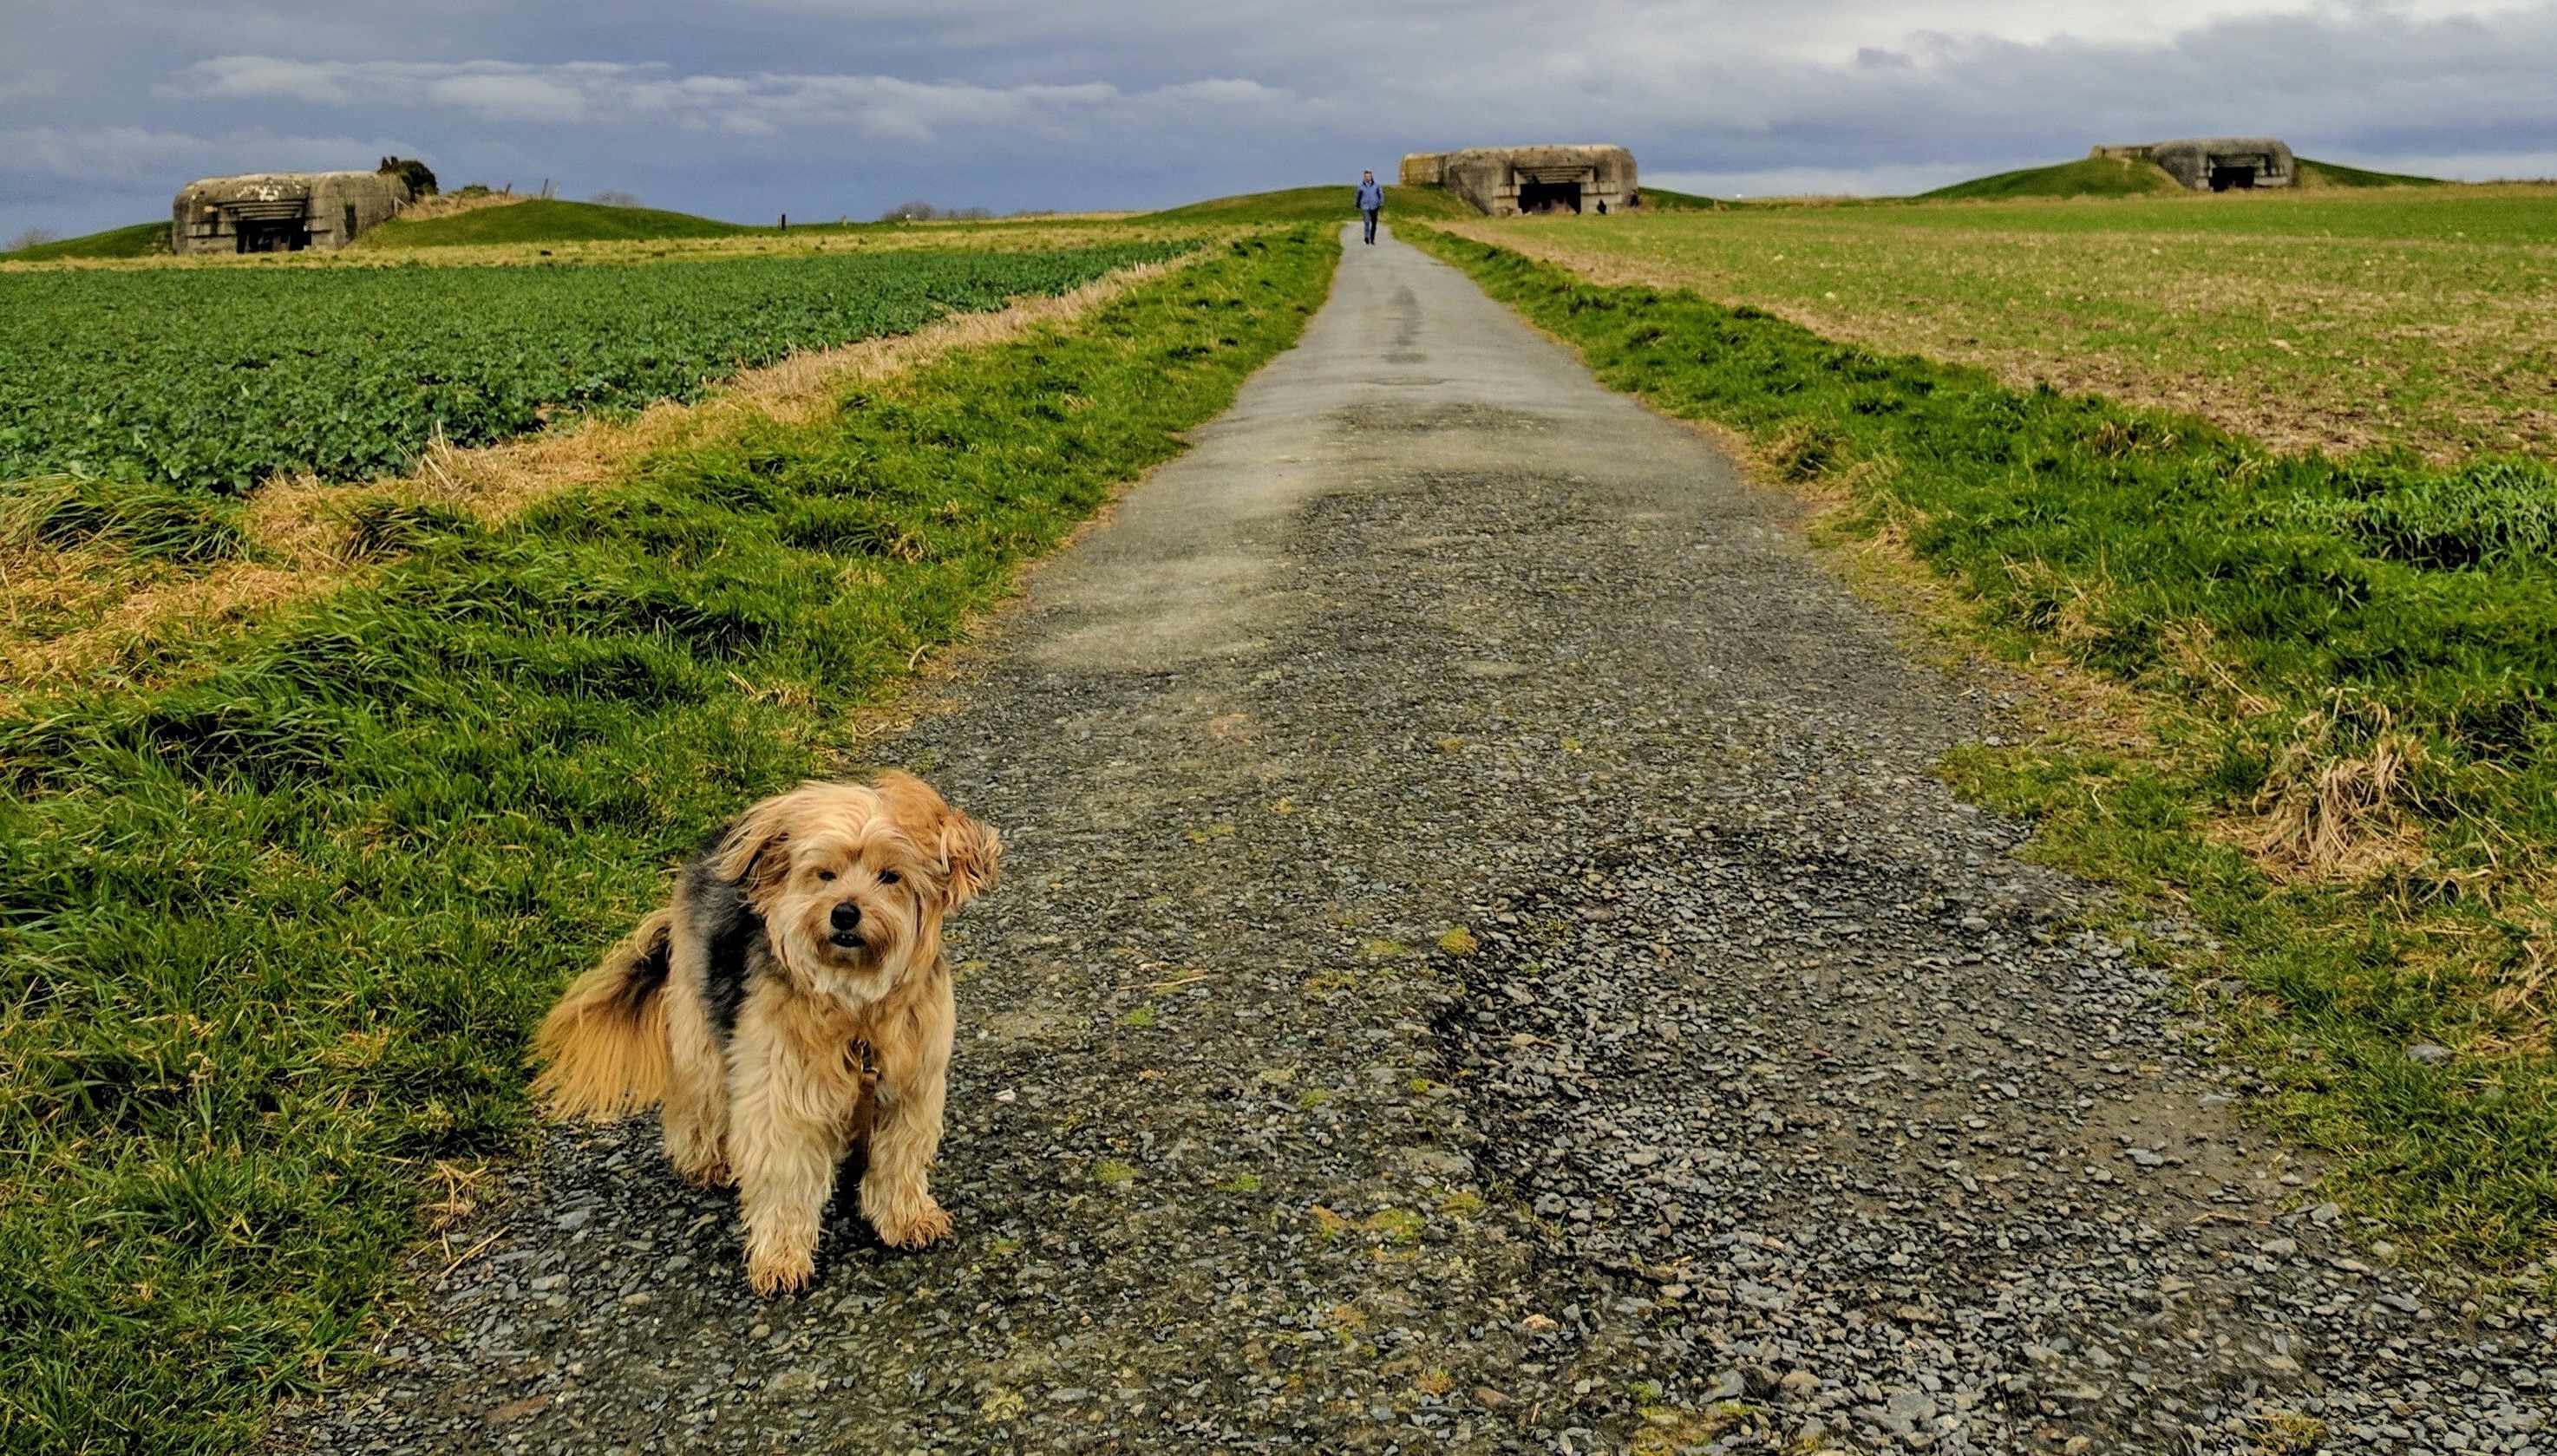 Traveling through France with Fido